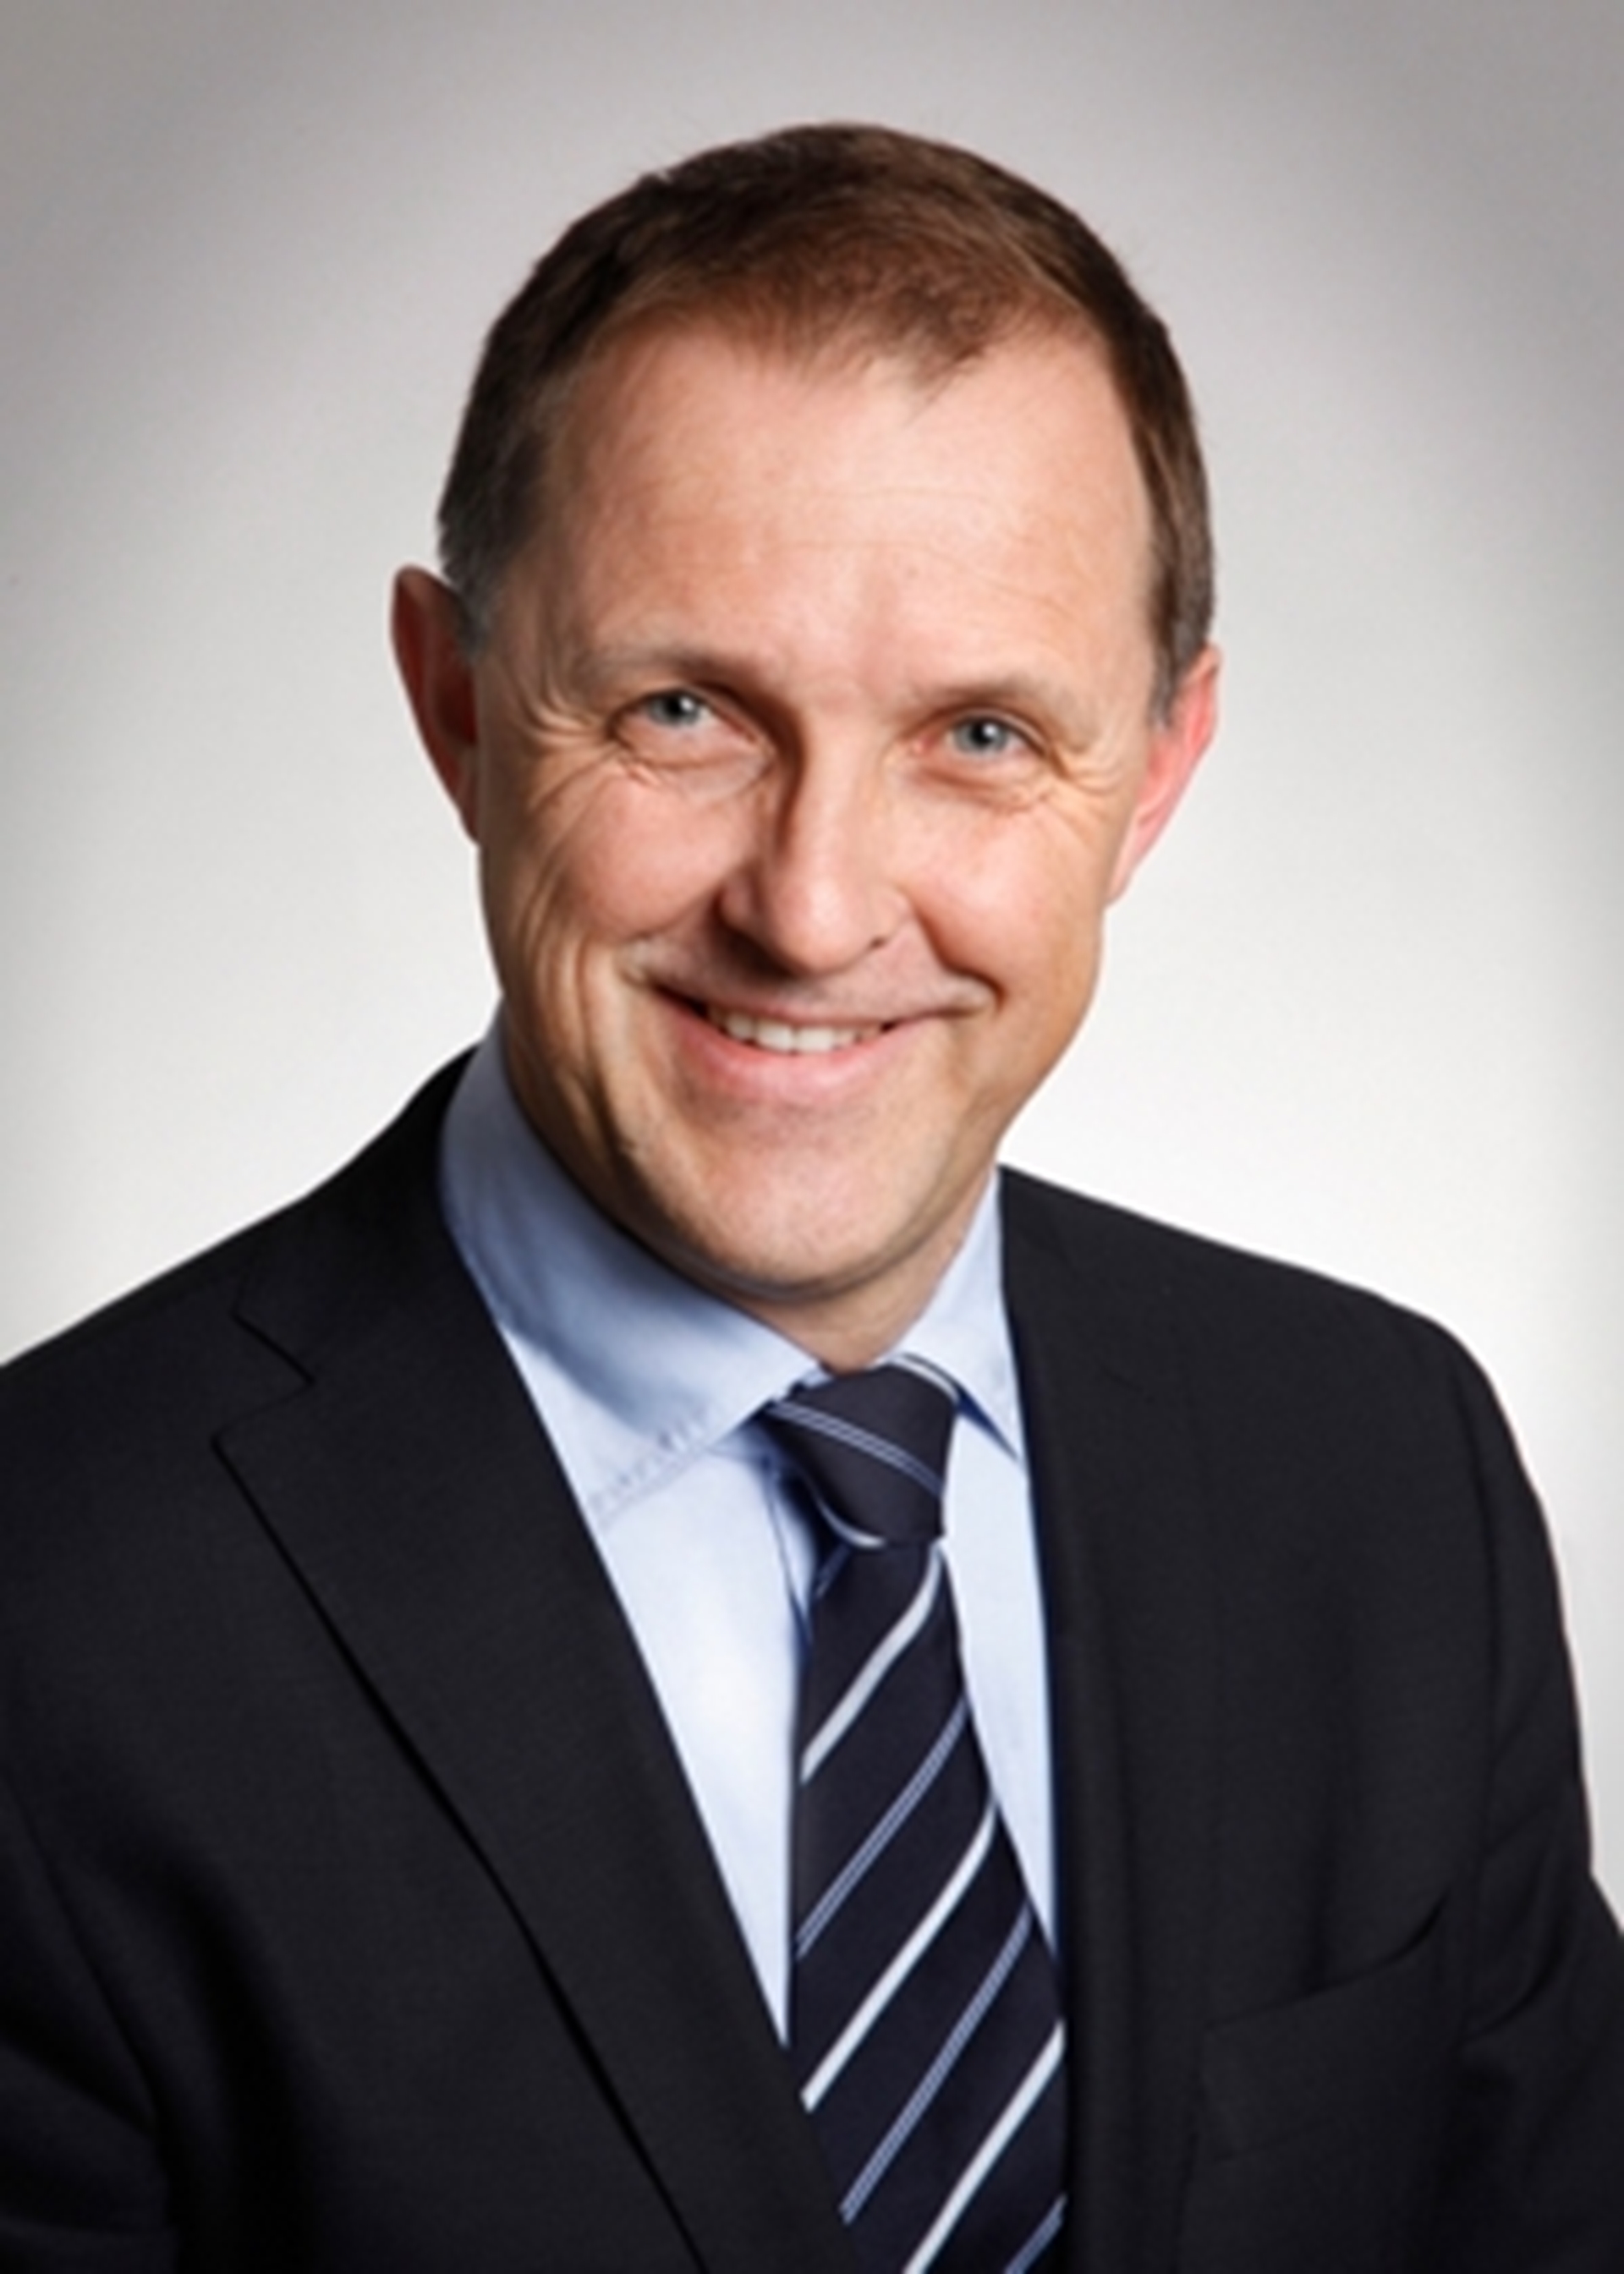 Thomas Sedran joins the Opel Management Board